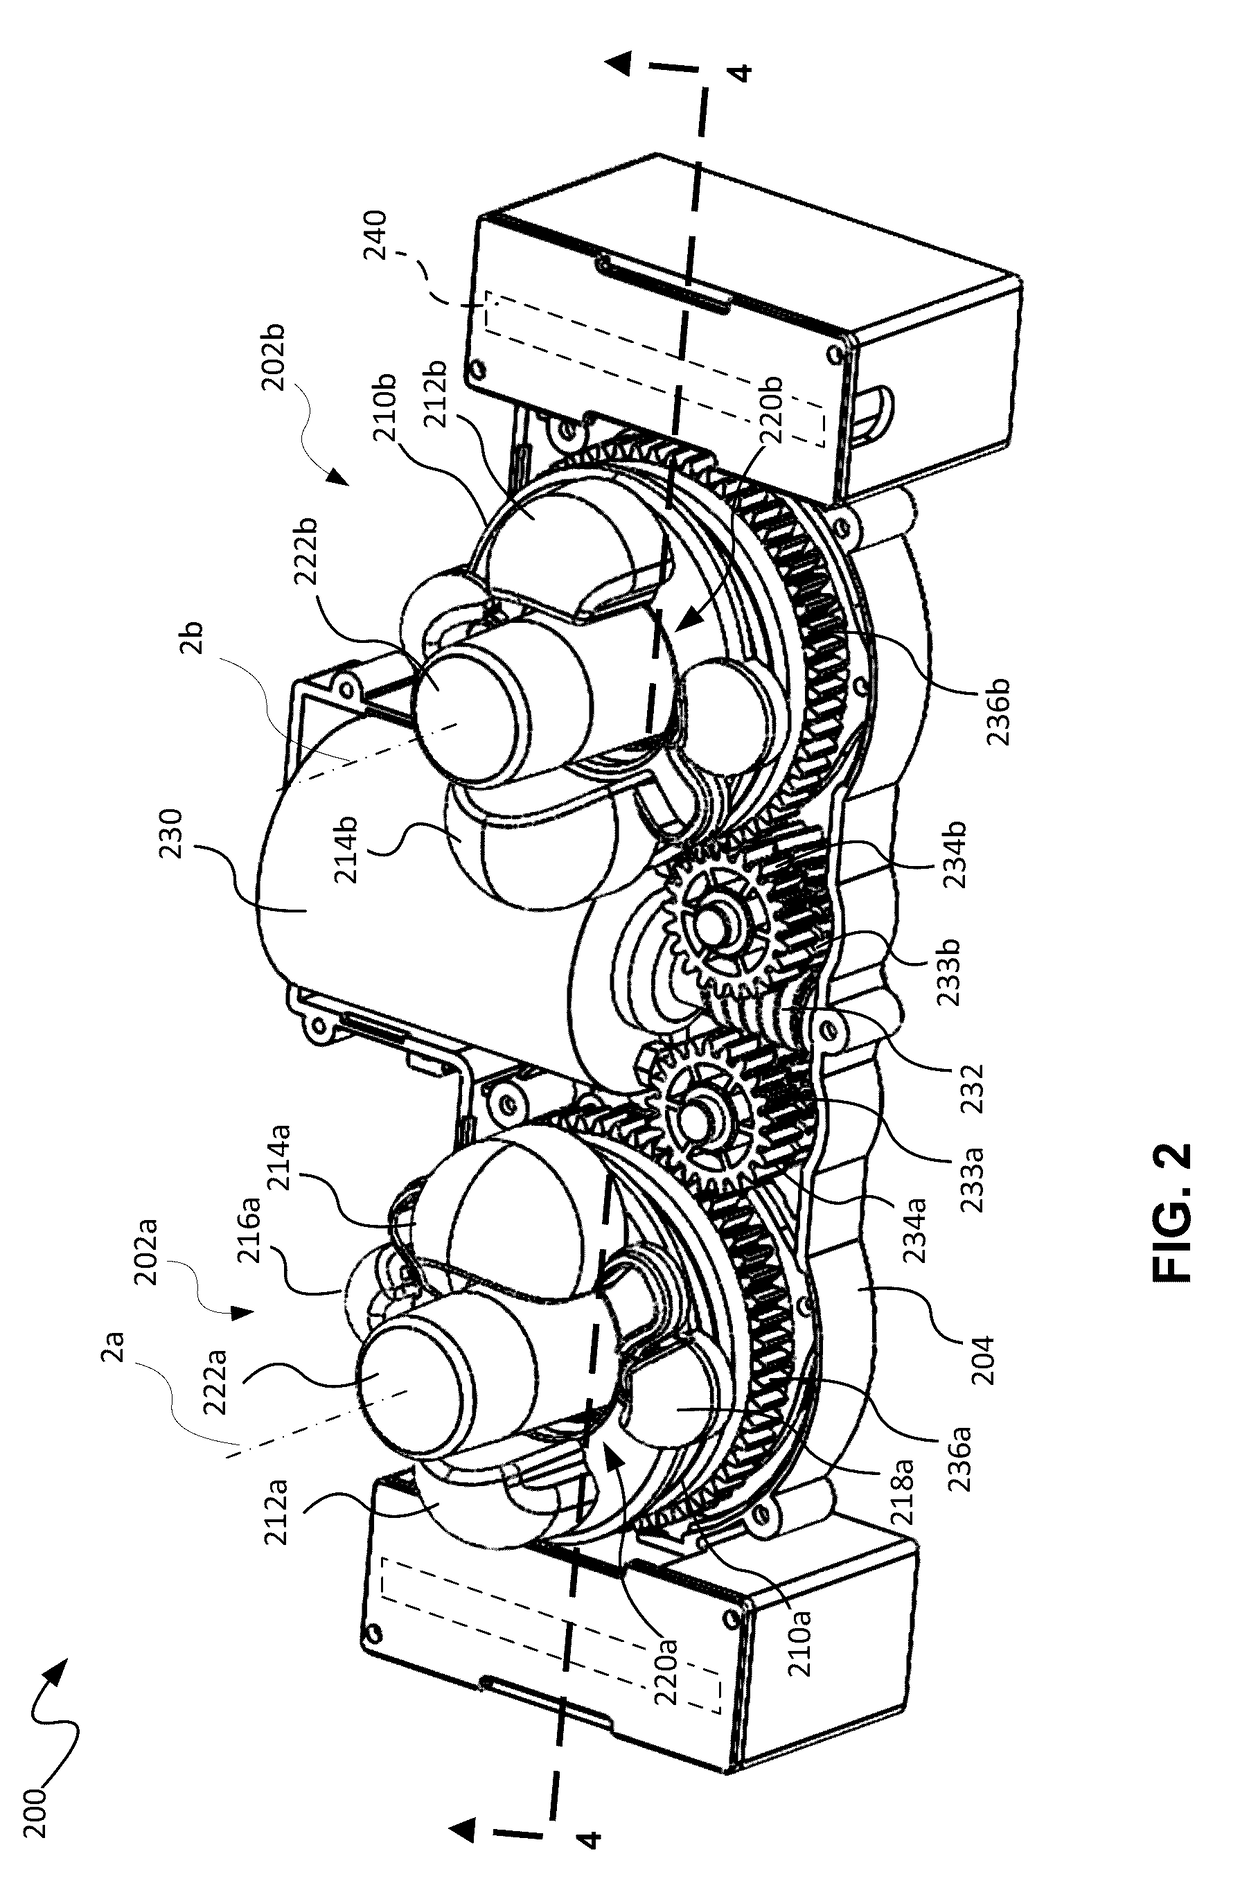 Massage apparatus with integrated rotating and reciprocating massage mechanisms